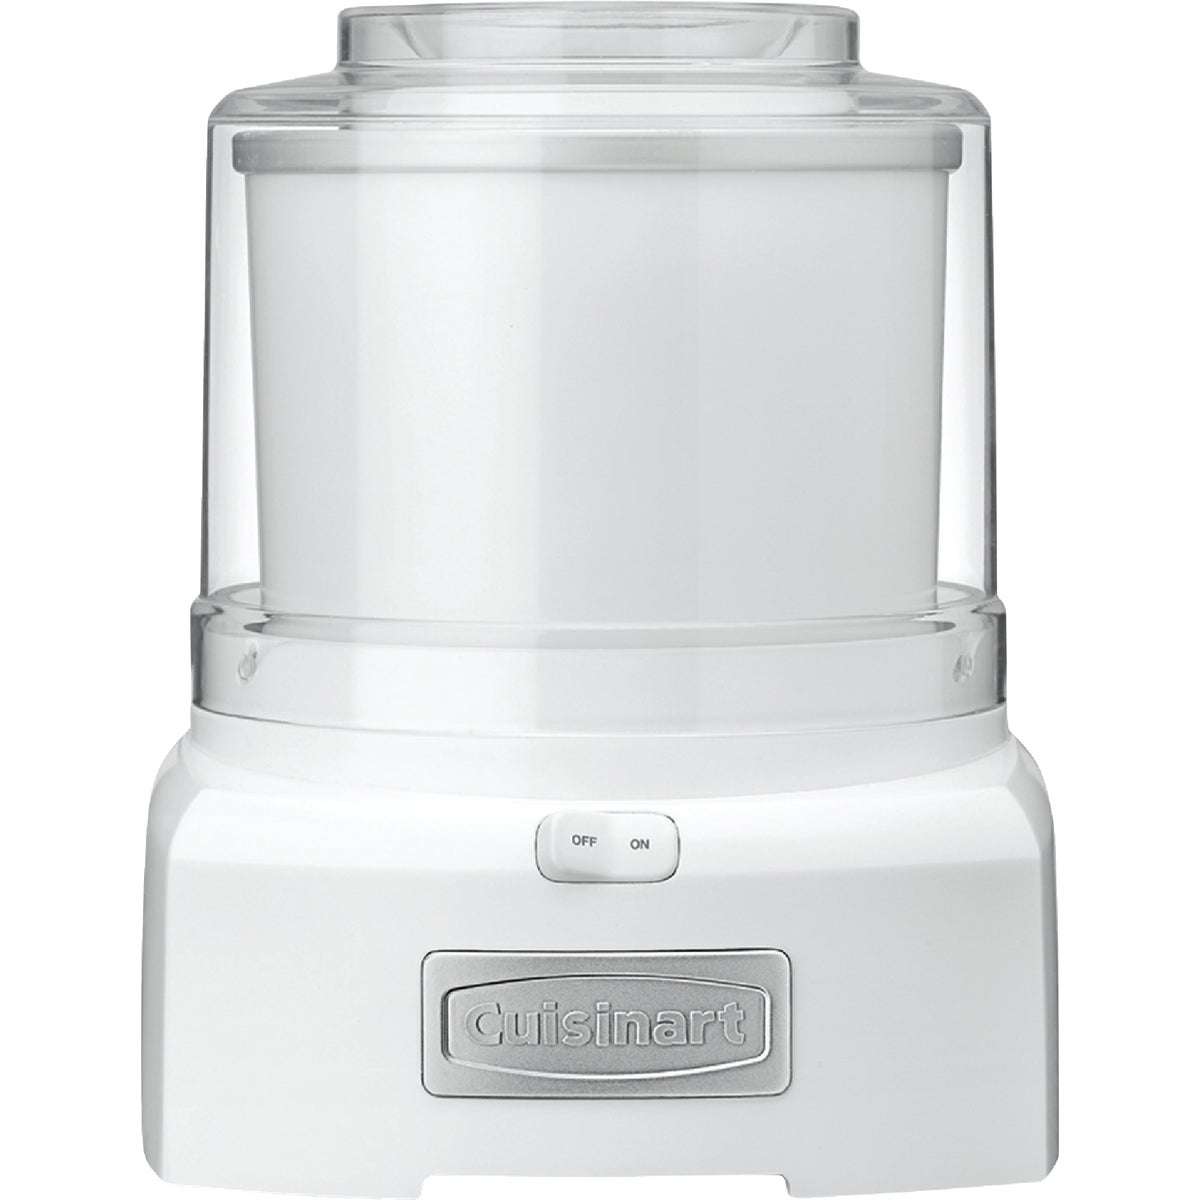 Item 653153, The fully automatic Cuisinart frozen yogurt - Ice cream and sorbet maker 